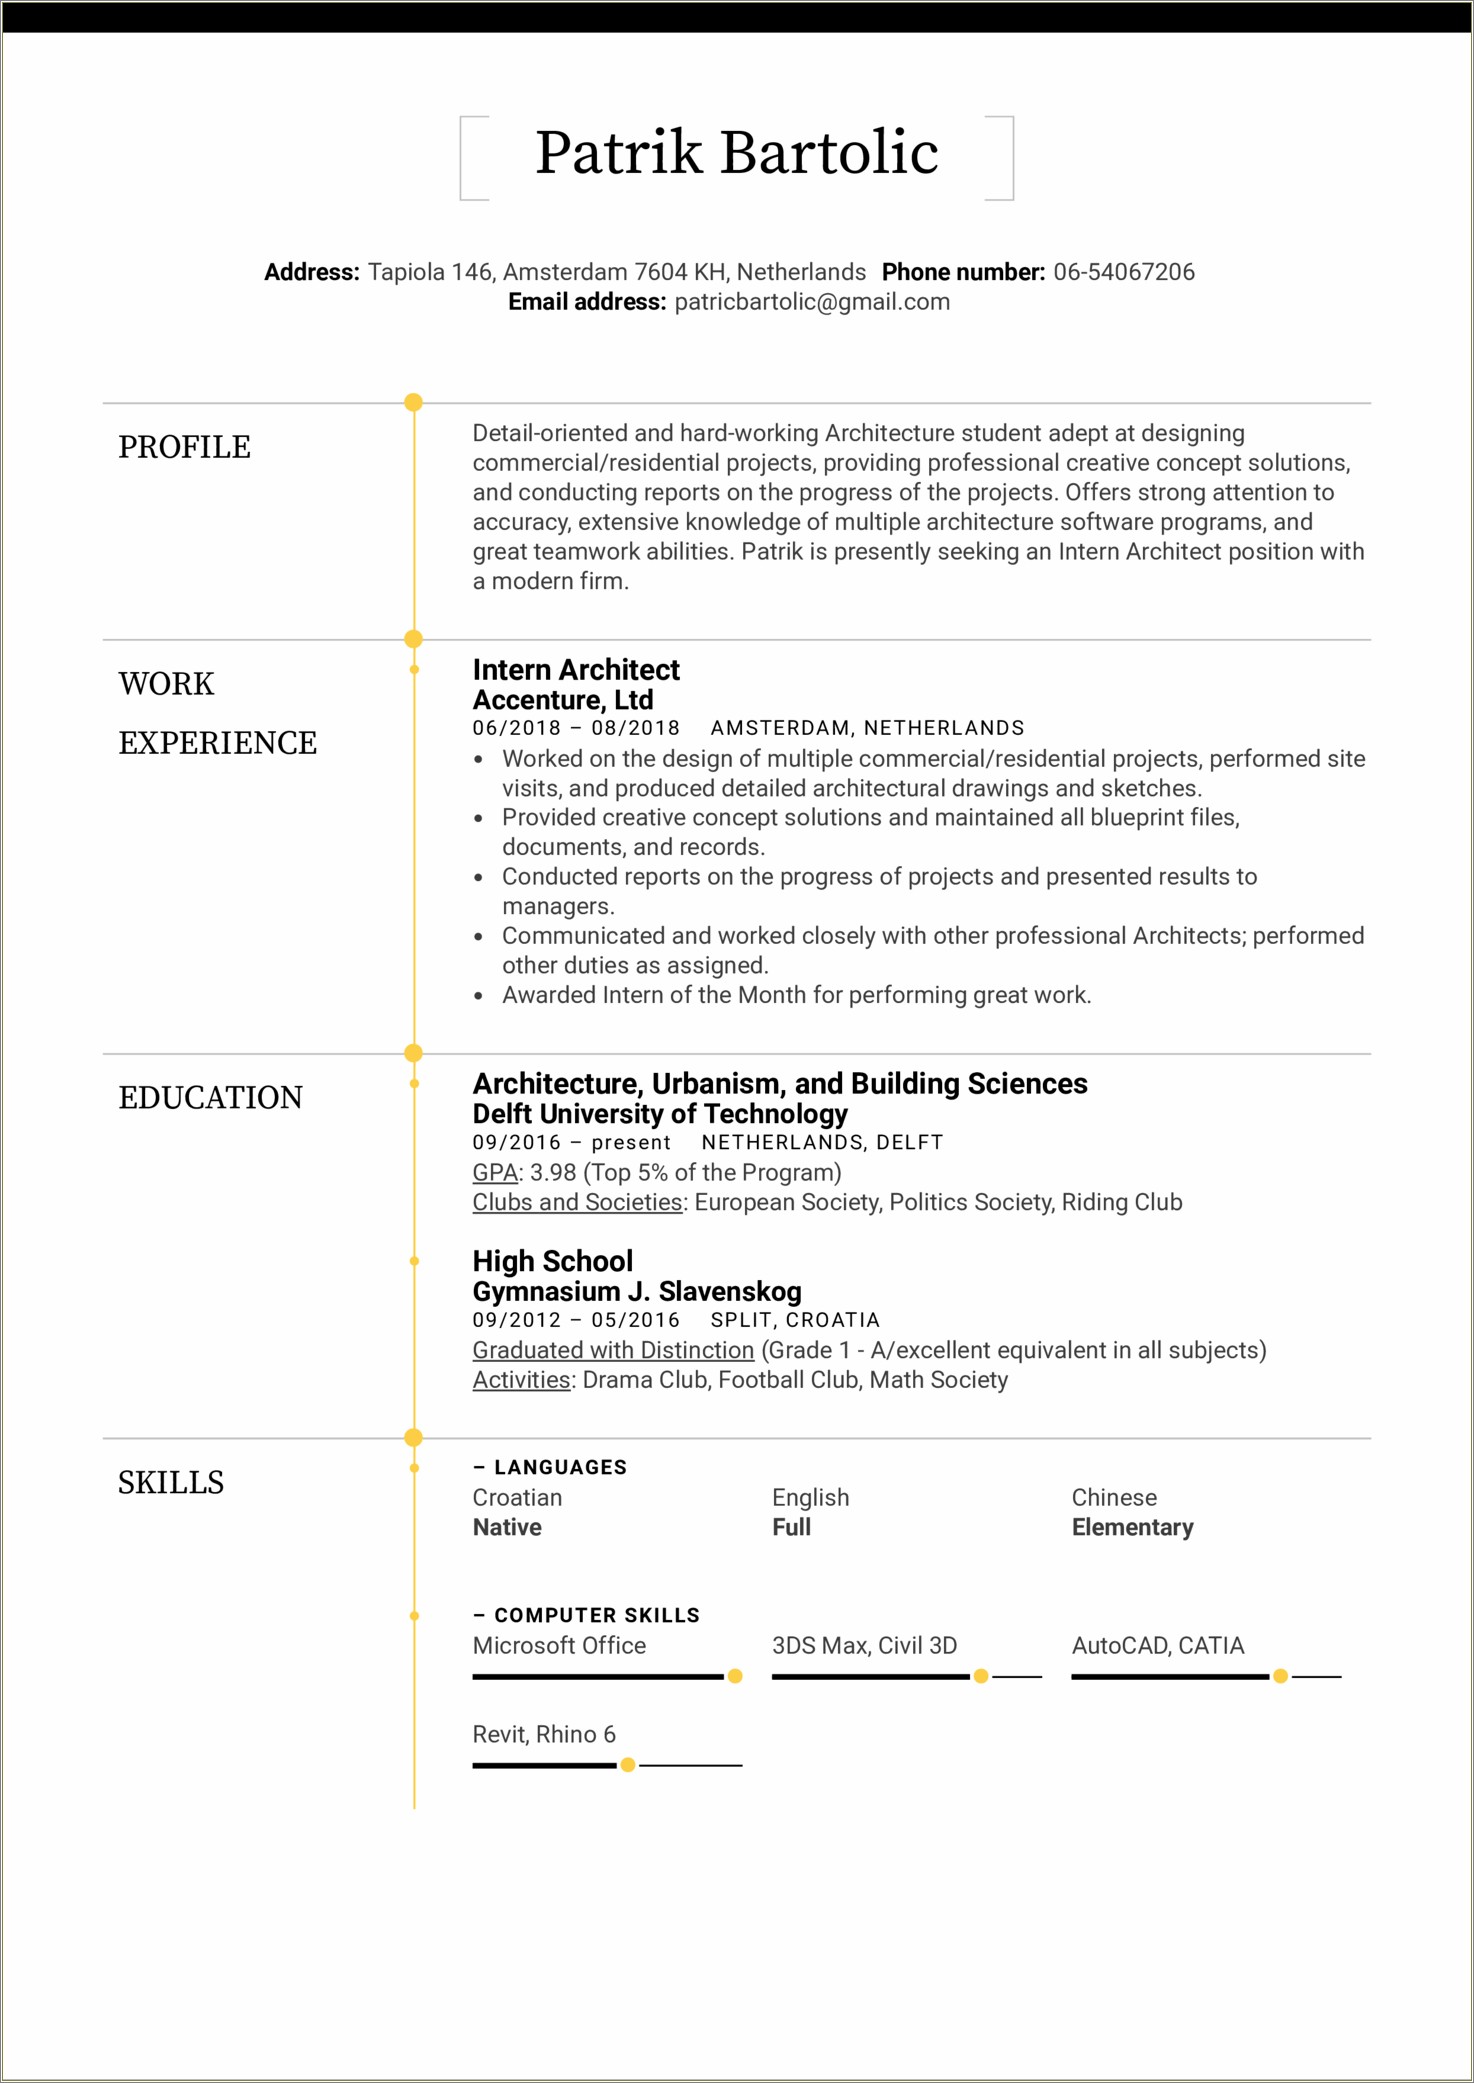 Example Of Student Resume For Ojt